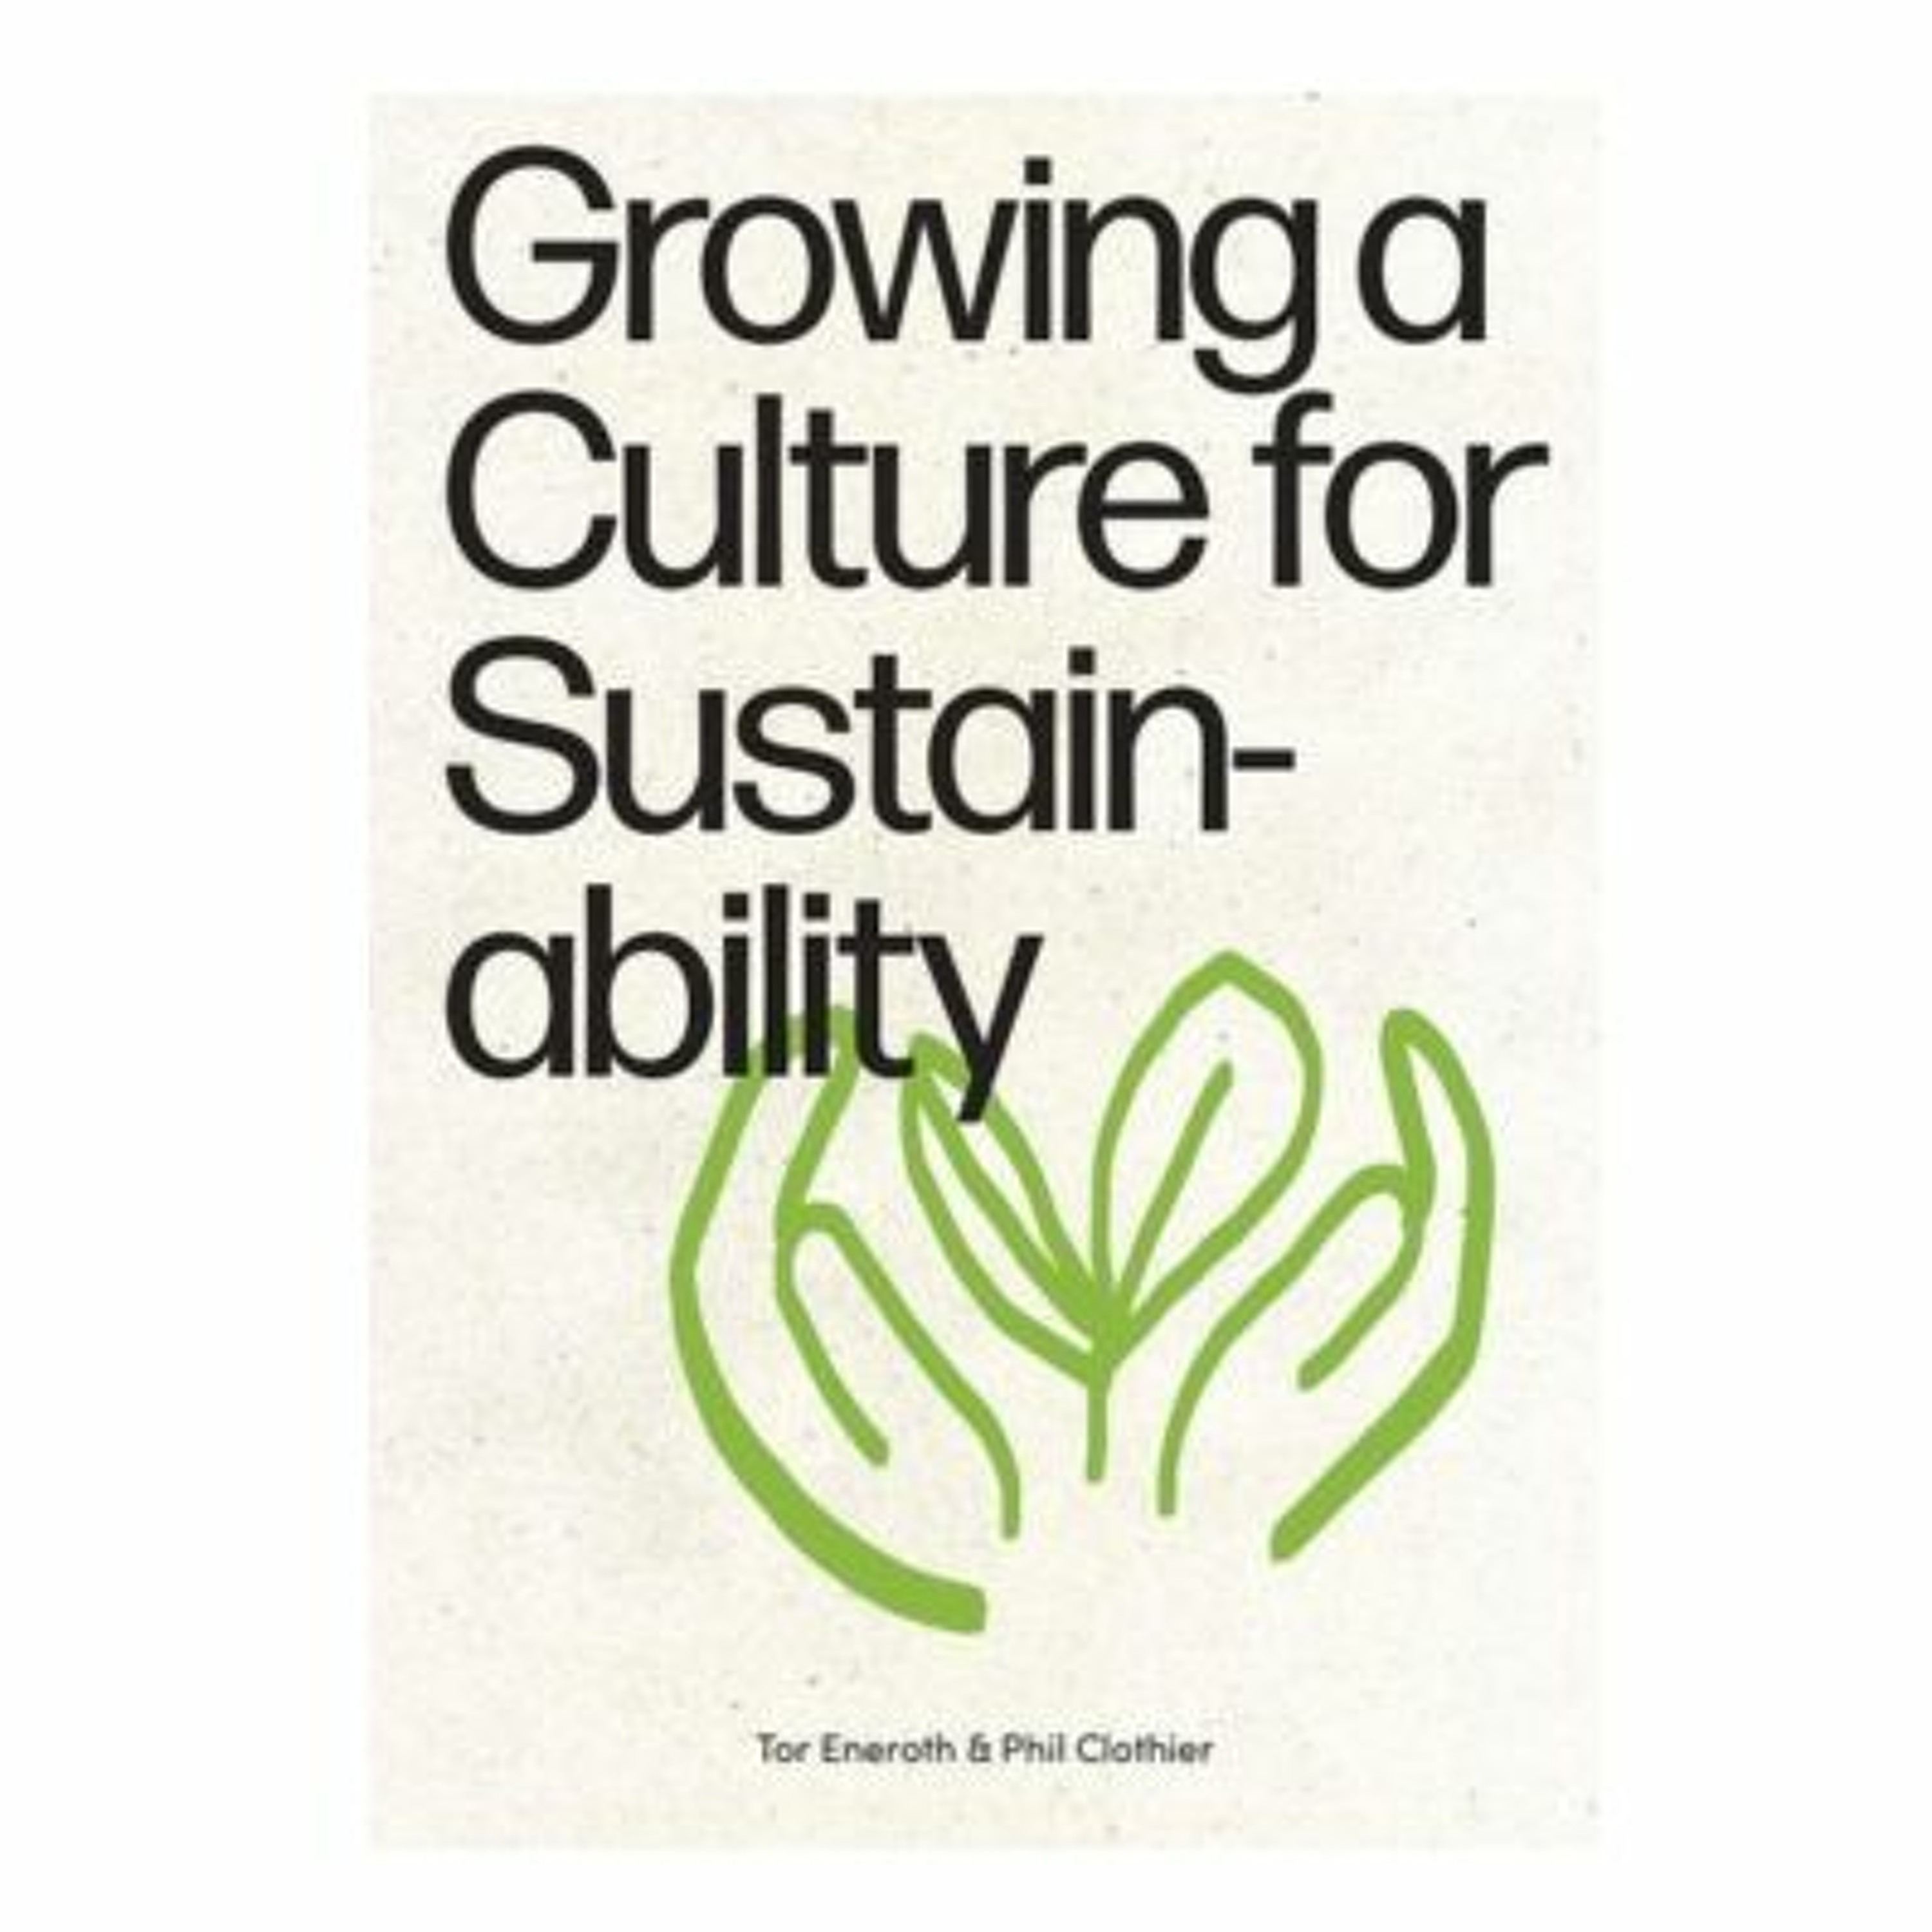 Podcast 1029: Growing a Culture for Sustainability with Phil Clothier and Tor Eneroth